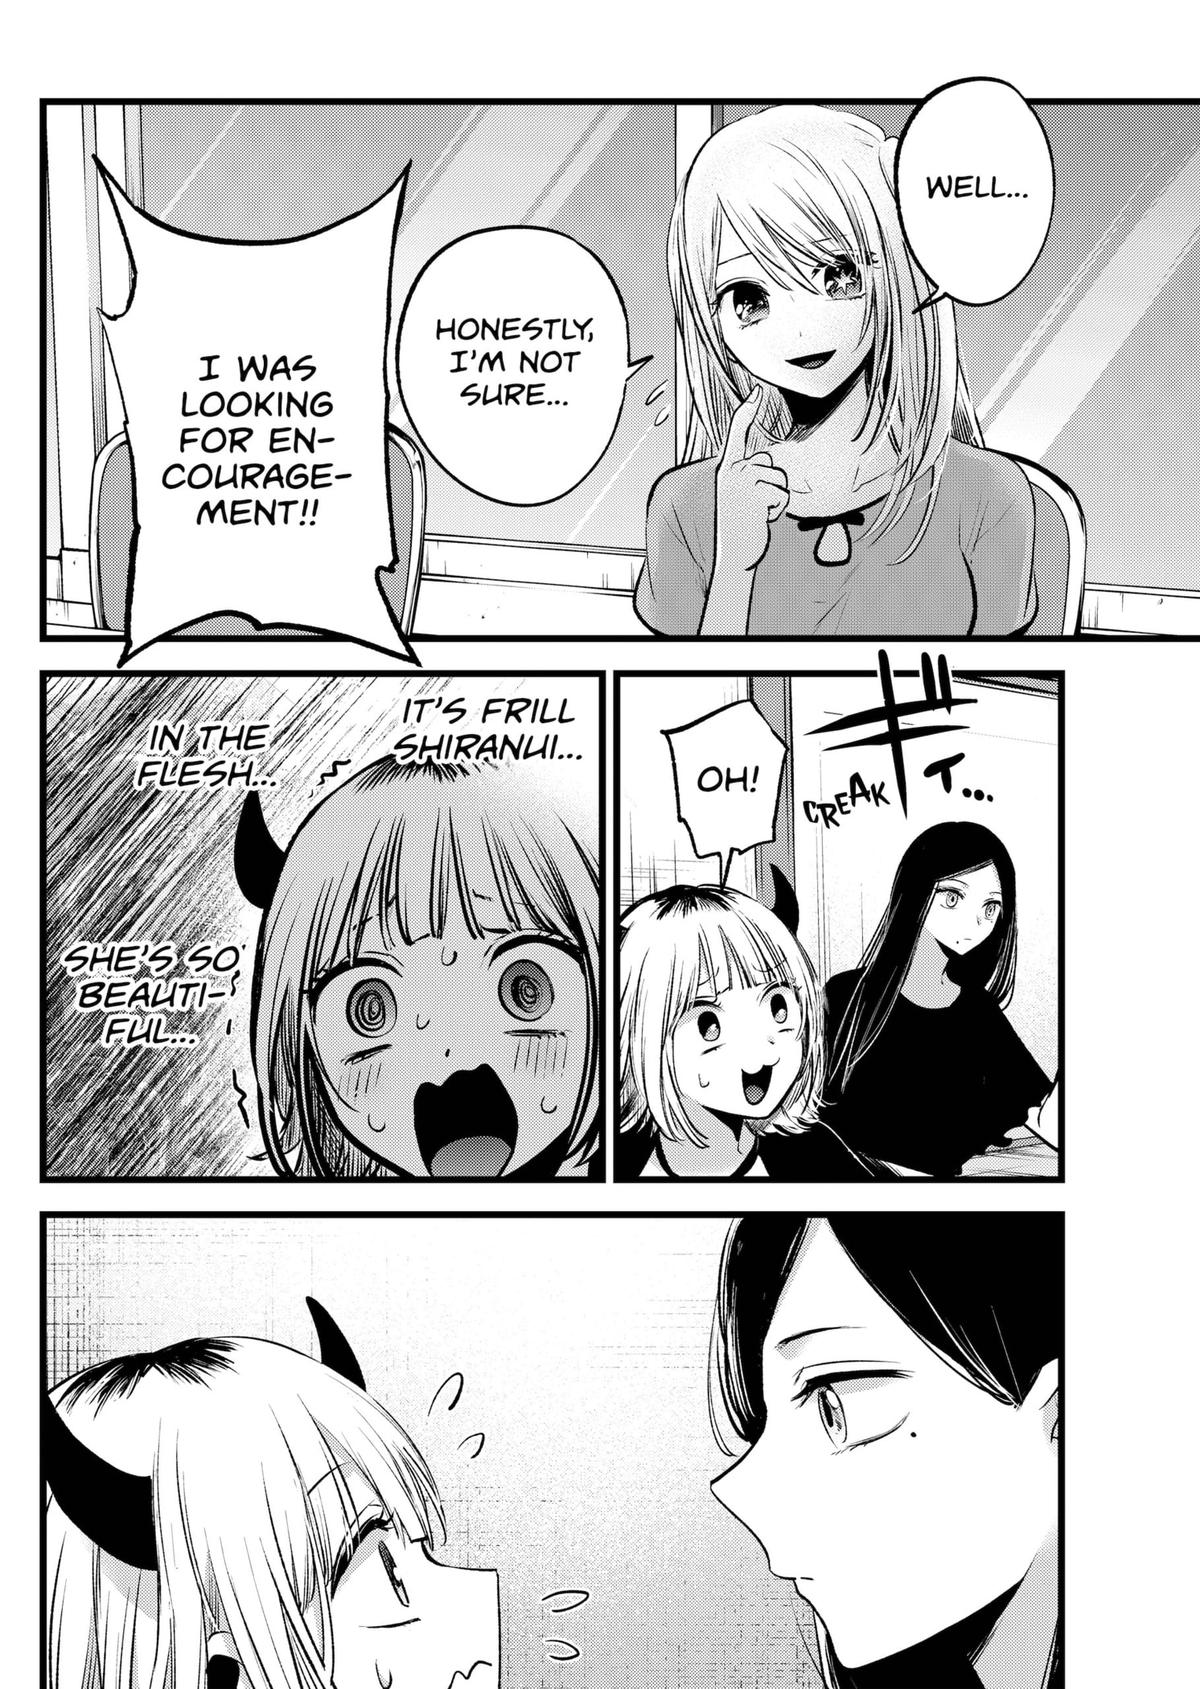 DISC] - This page from Chapter 9 of the The Quintessential Quintuplets Manga  aged very well (SPOILER) : r/manga